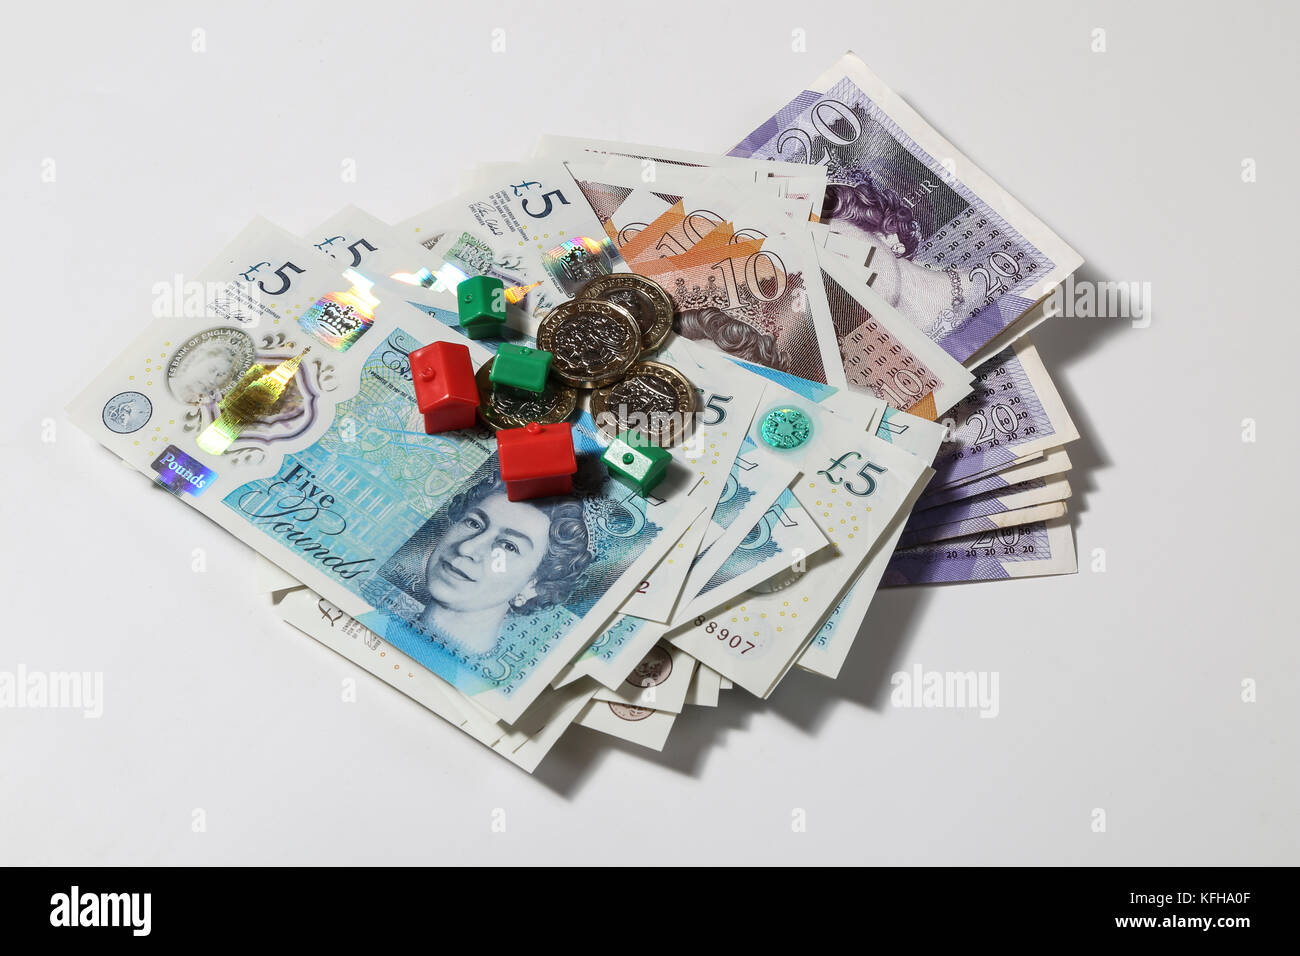 New British £5 and £10 notes with red and green monopoly houses and hotels Stock Photo